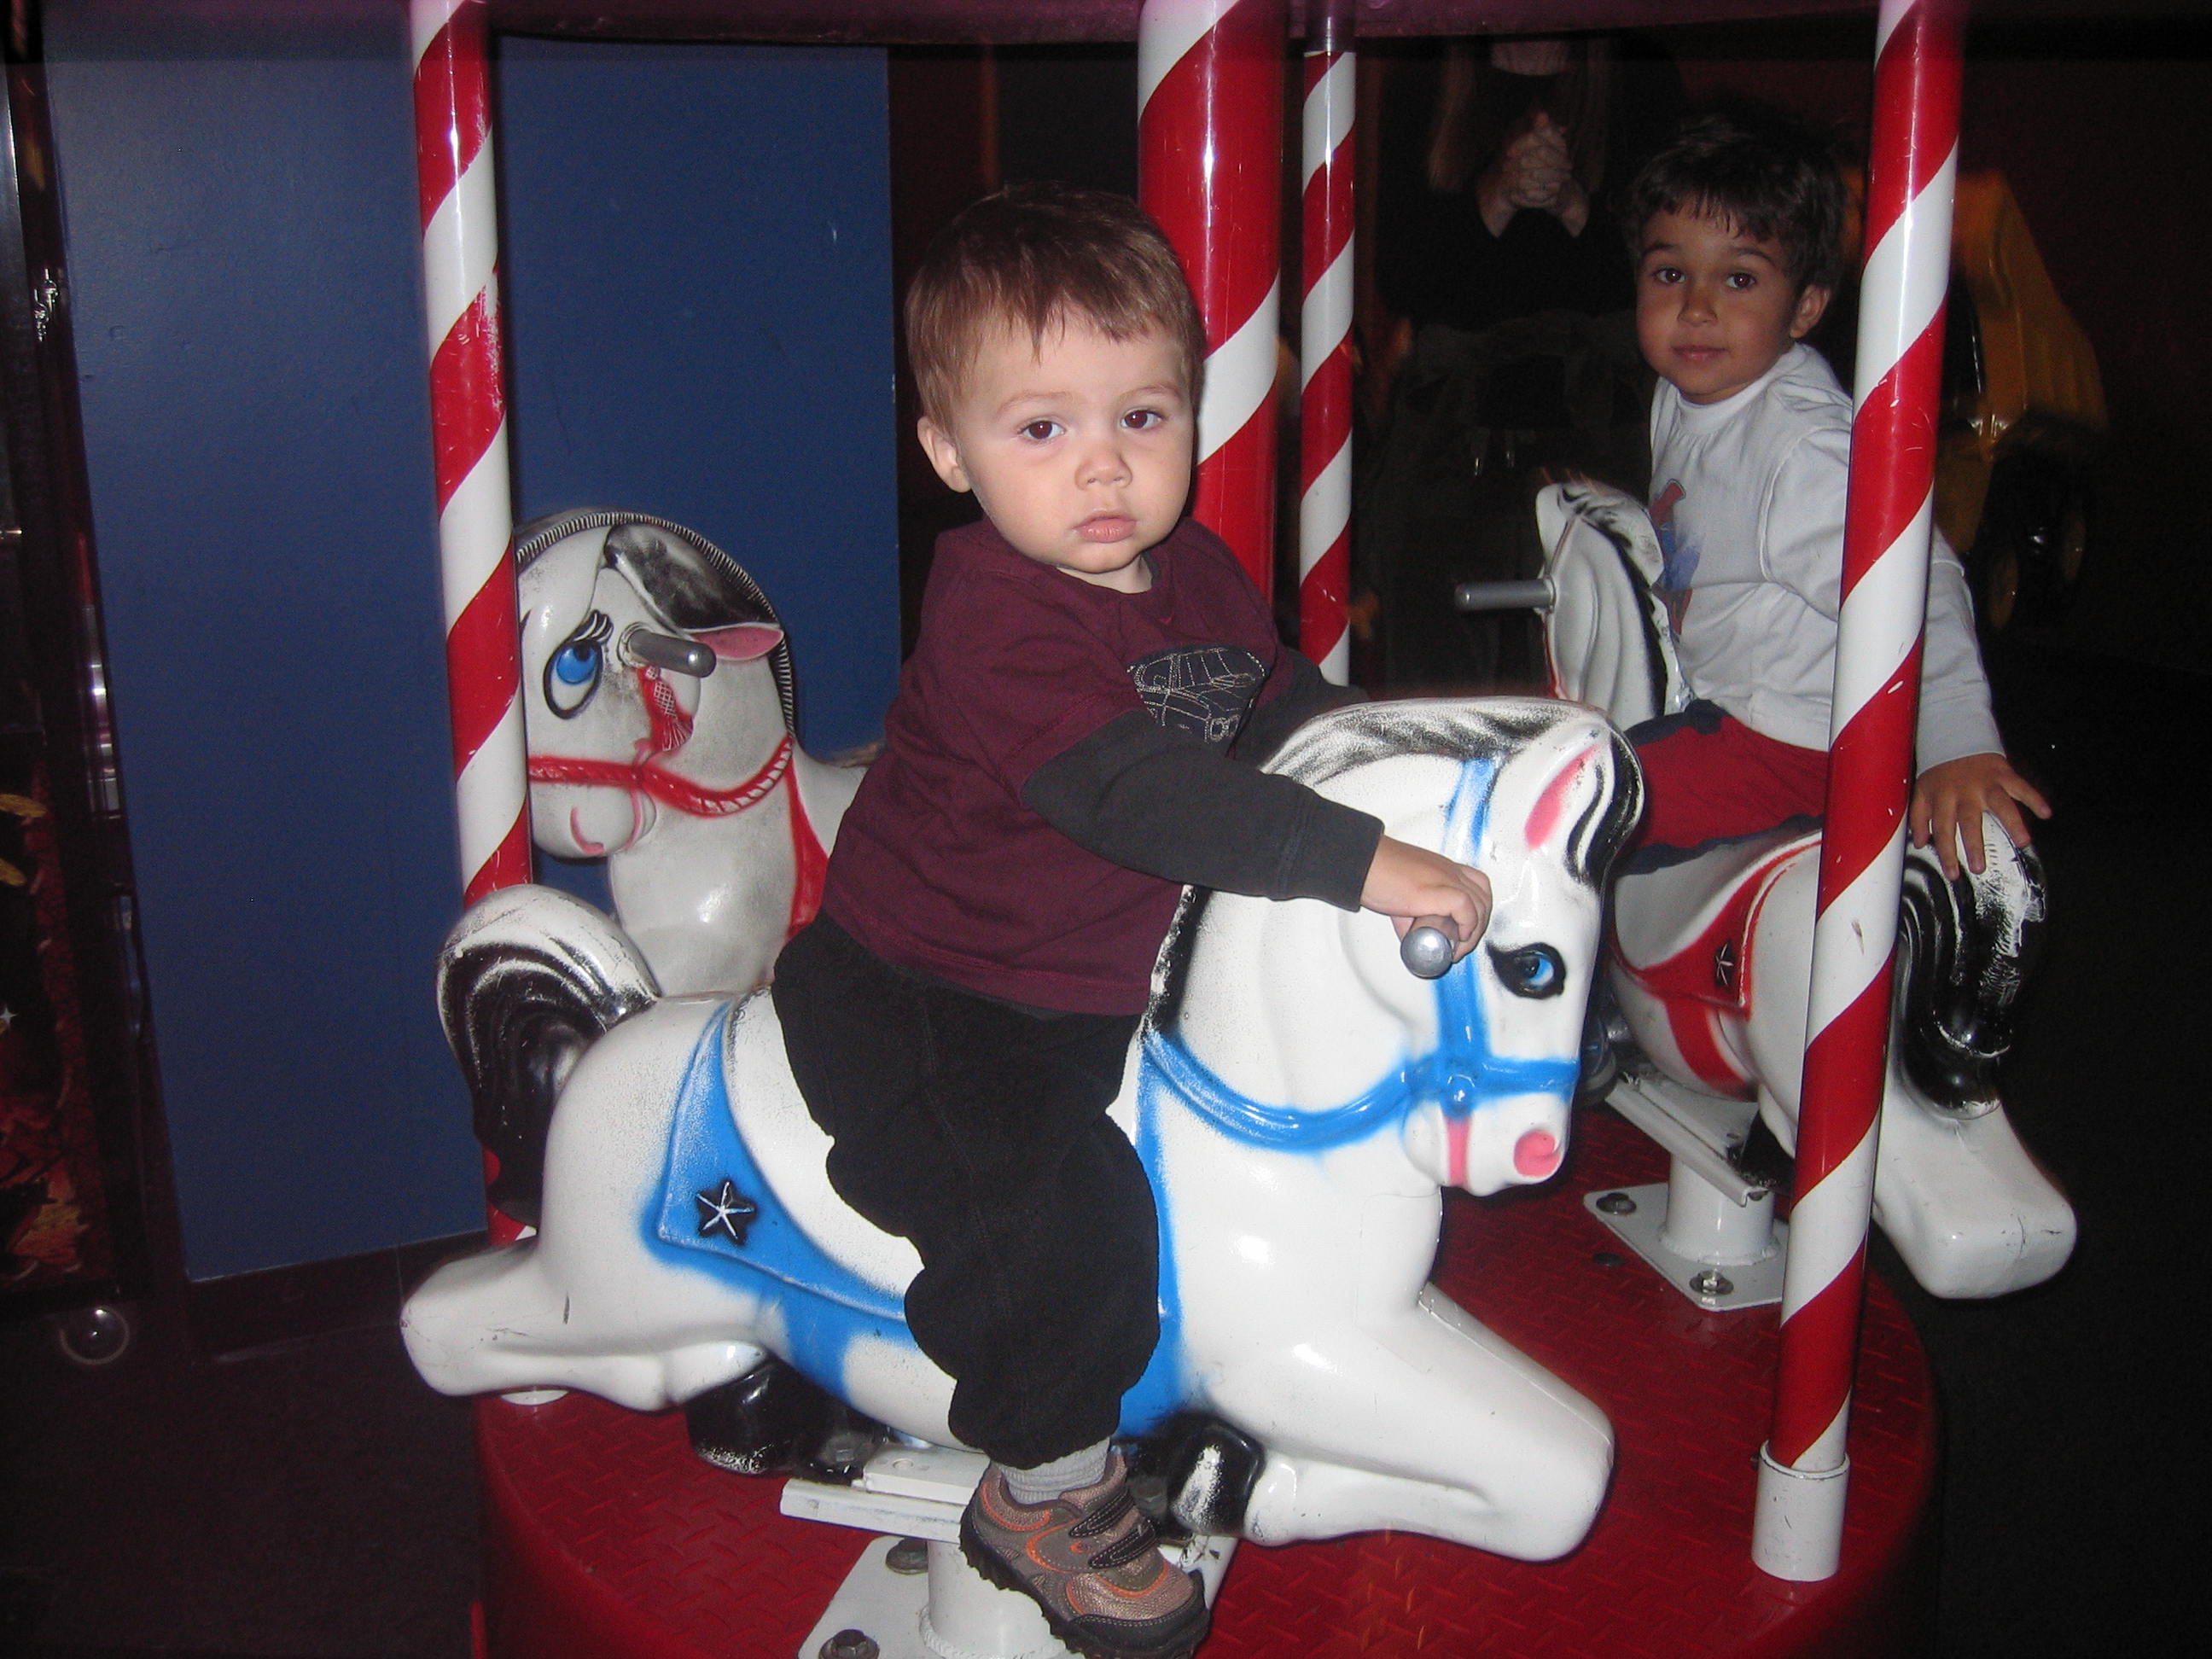 Zeke's first ride by himself! I ran around in circles beside him in case he fell. Around and around...I almost puked.